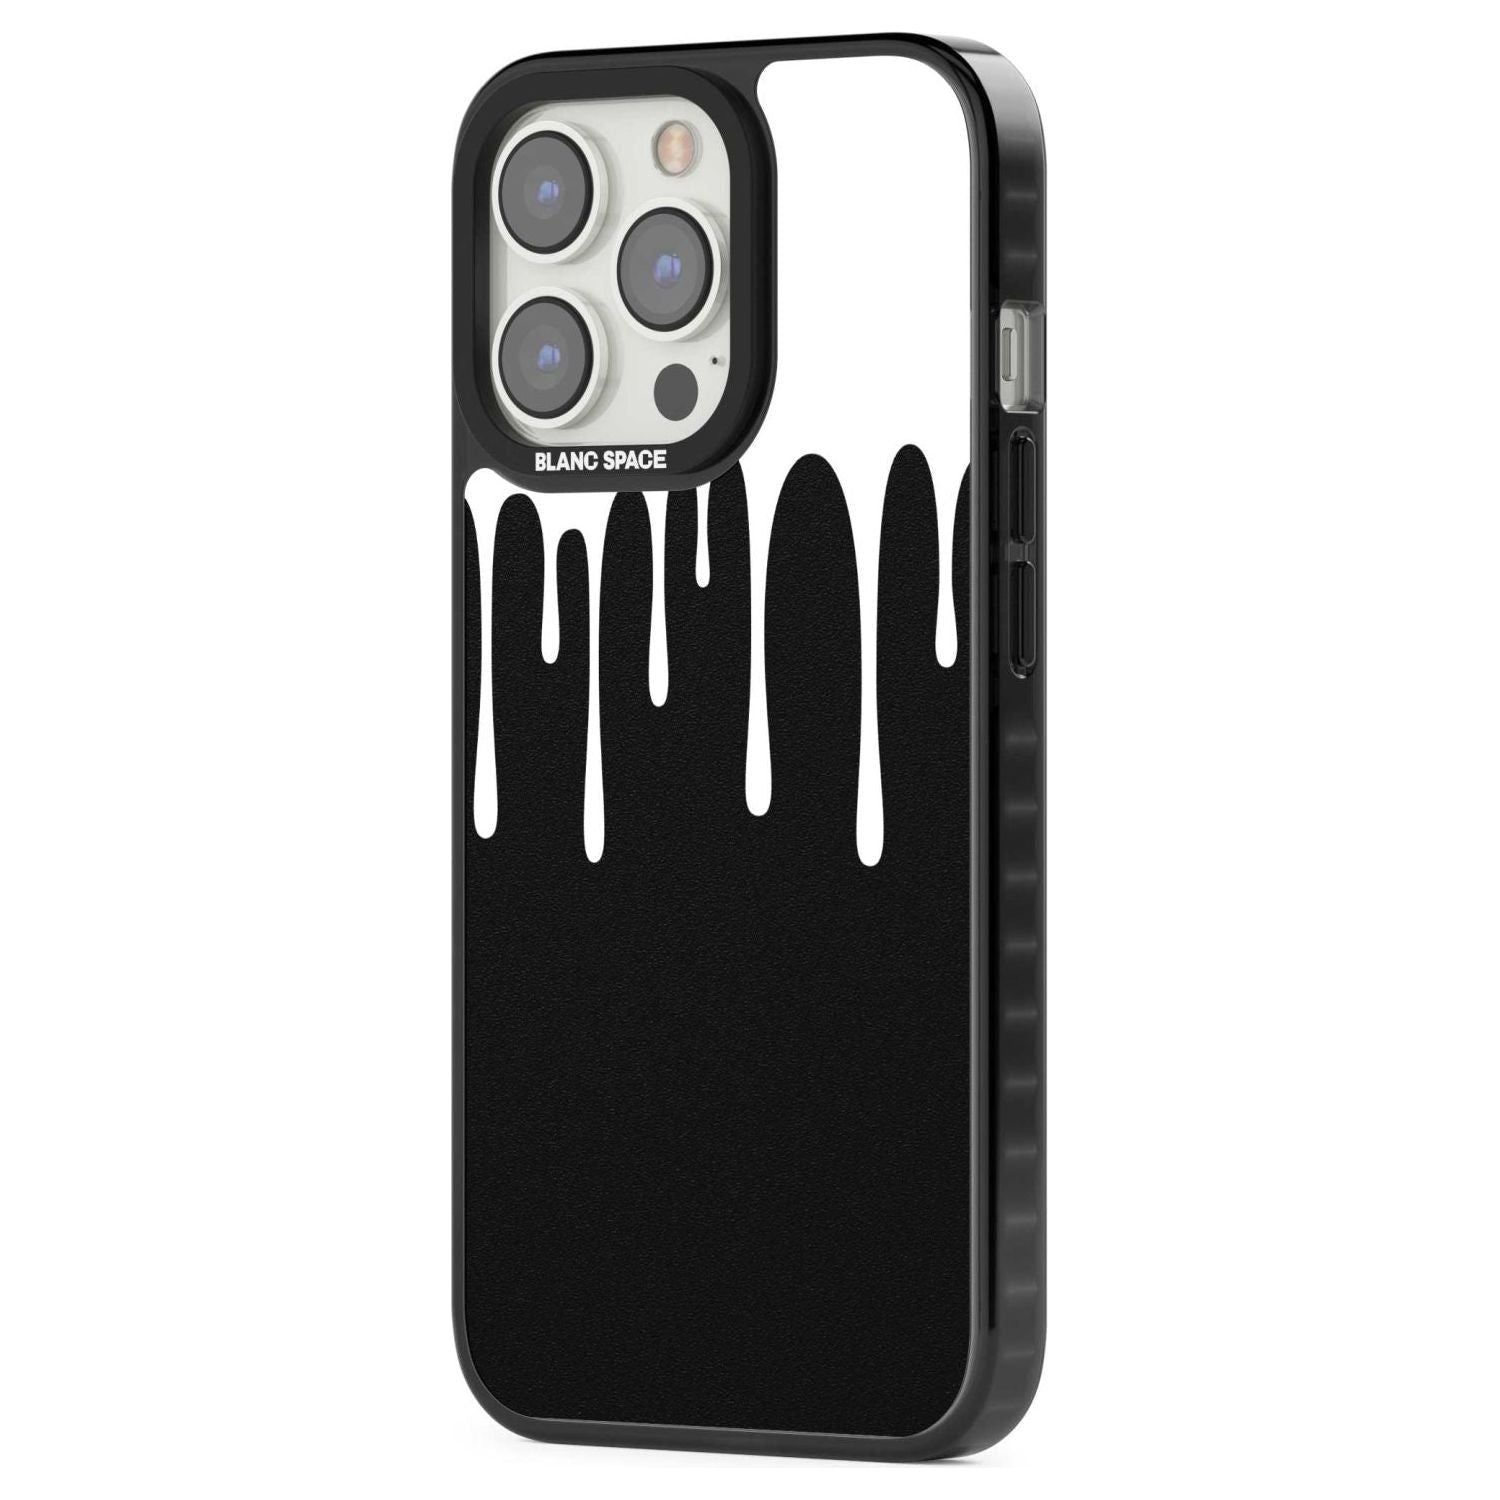 Melted Effect: White & Black Phone Case iPhone 15 Pro Max / Black Impact Case,iPhone 15 Plus / Black Impact Case,iPhone 15 Pro / Black Impact Case,iPhone 15 / Black Impact Case,iPhone 15 Pro Max / Impact Case,iPhone 15 Plus / Impact Case,iPhone 15 Pro / Impact Case,iPhone 15 / Impact Case,iPhone 15 Pro Max / Magsafe Black Impact Case,iPhone 15 Plus / Magsafe Black Impact Case,iPhone 15 Pro / Magsafe Black Impact Case,iPhone 15 / Magsafe Black Impact Case,iPhone 14 Pro Max / Black Impact Case,iPhone 14 Plus 